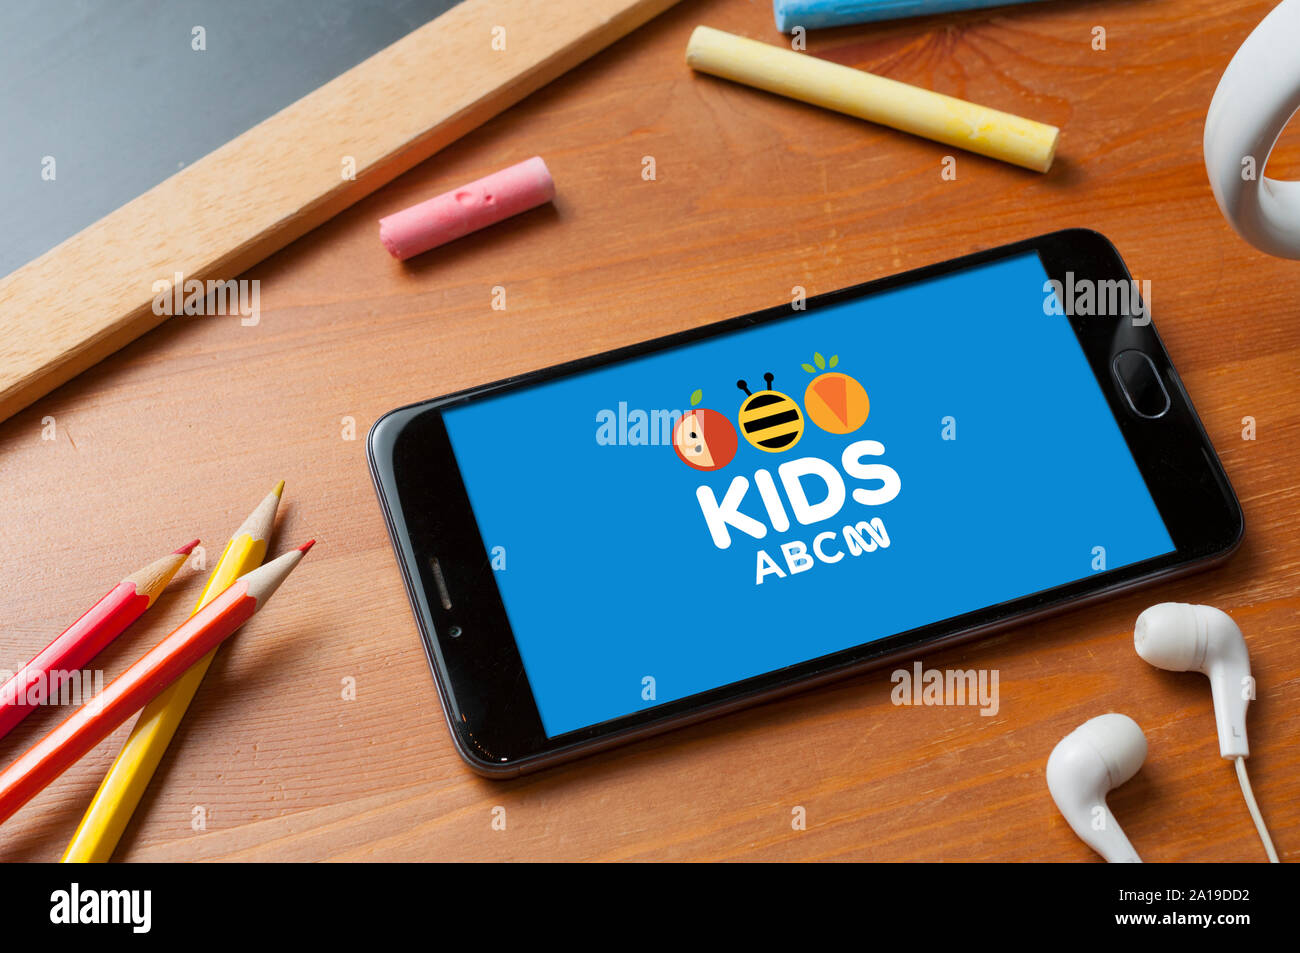 Carrara, Italy - September 25, 2019: Watching the kid's channel of the Australian television station ABC on a table with headphones, pencils and a sma Stock Photo